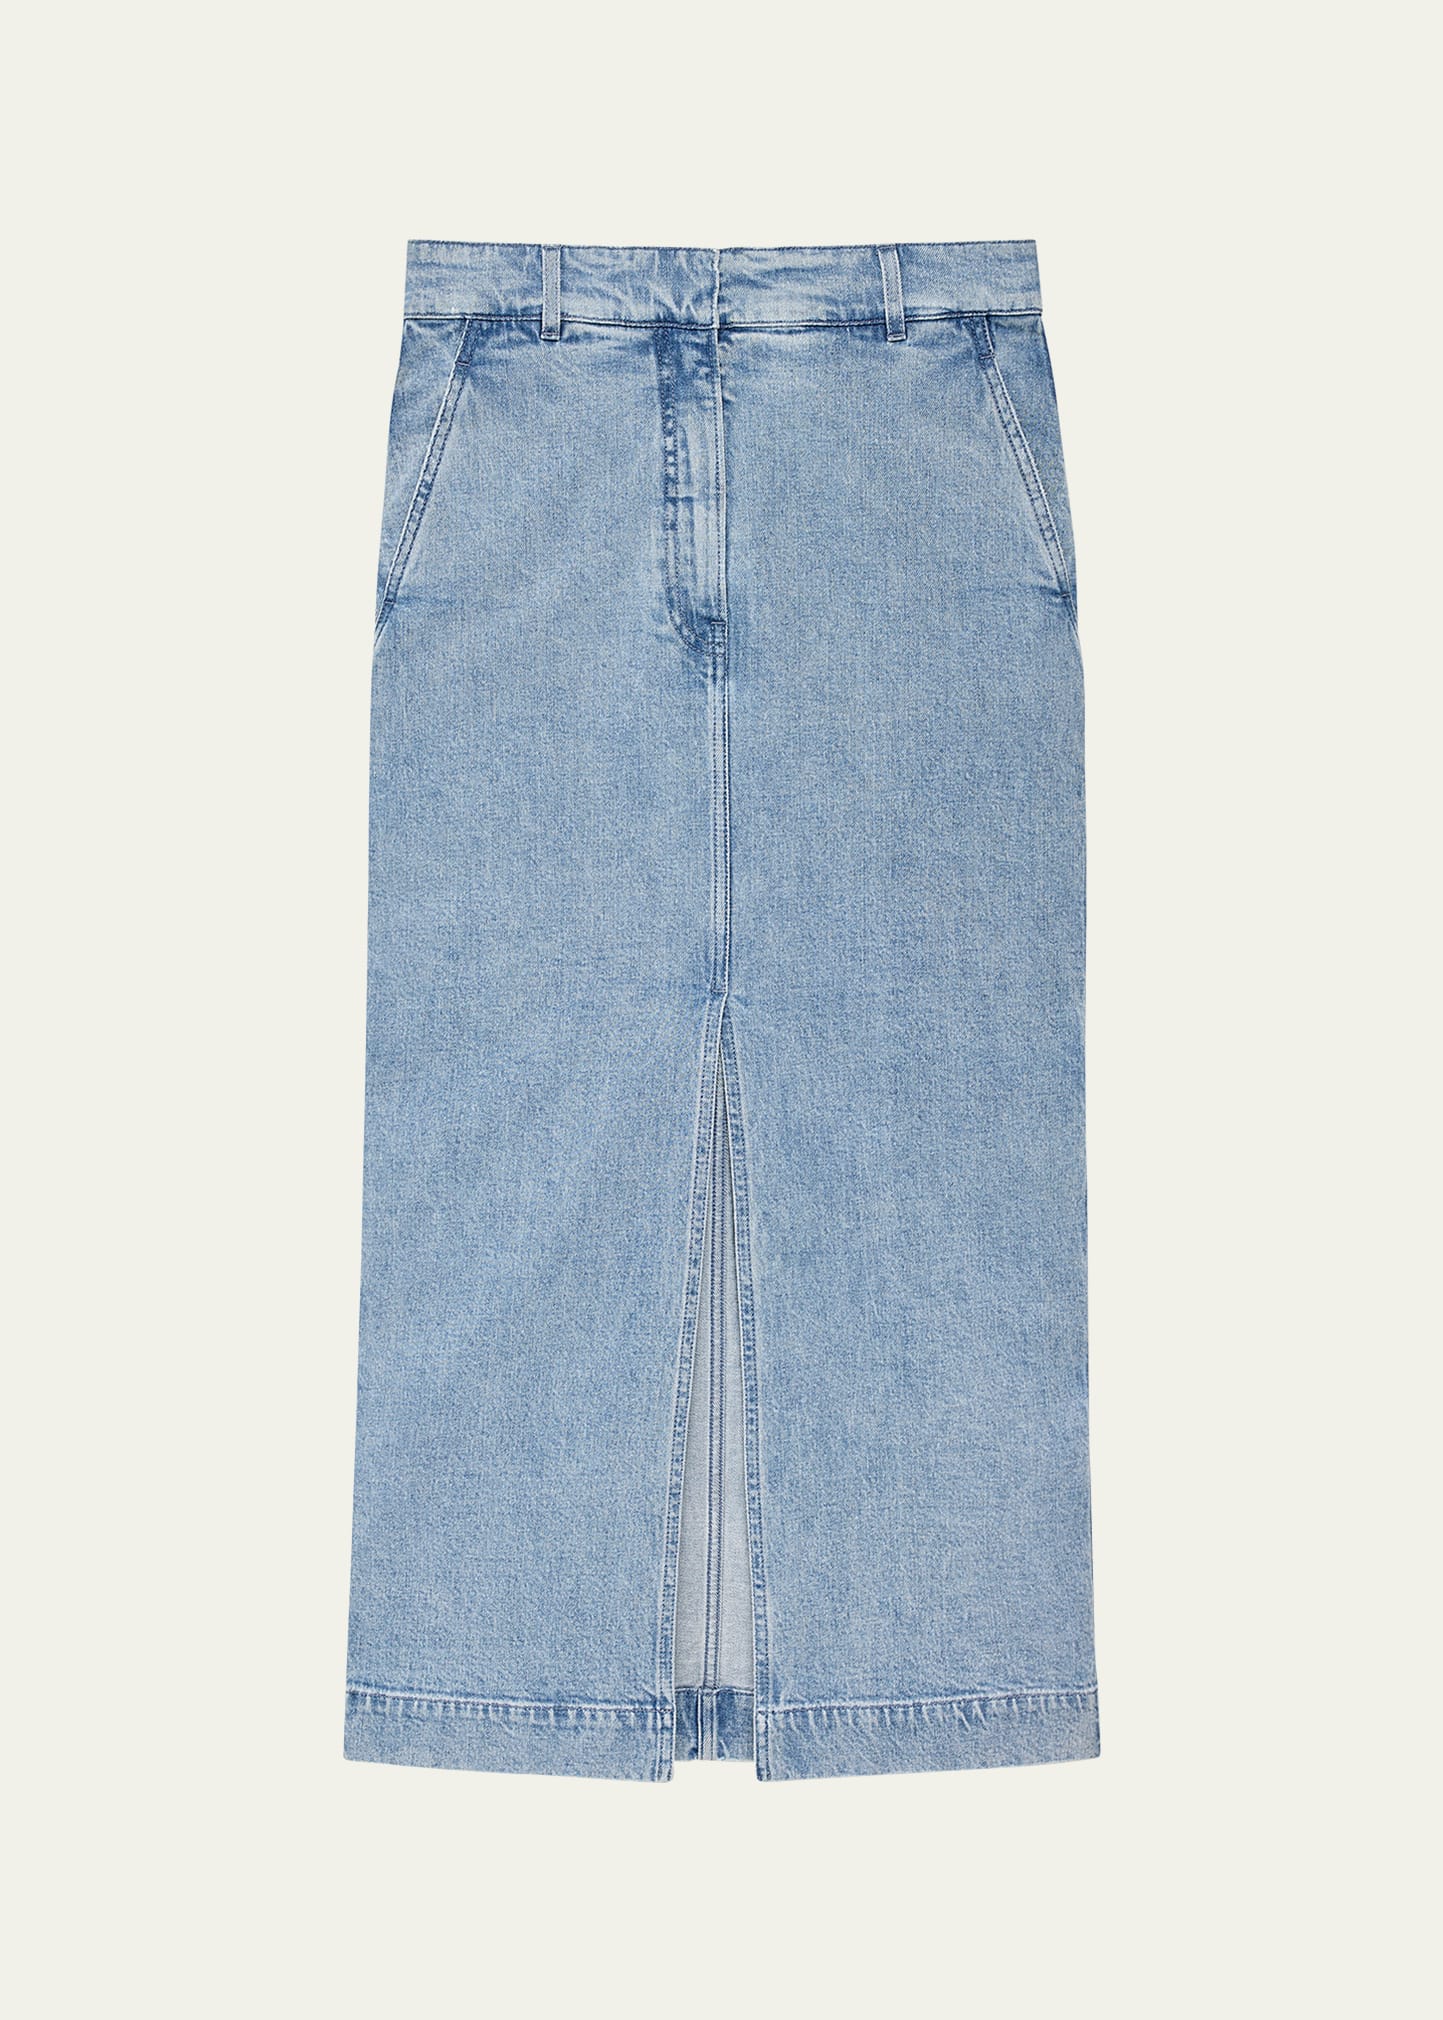 Shop Another Tomorrow Denim Pencil Skirt In Light Blue Wash